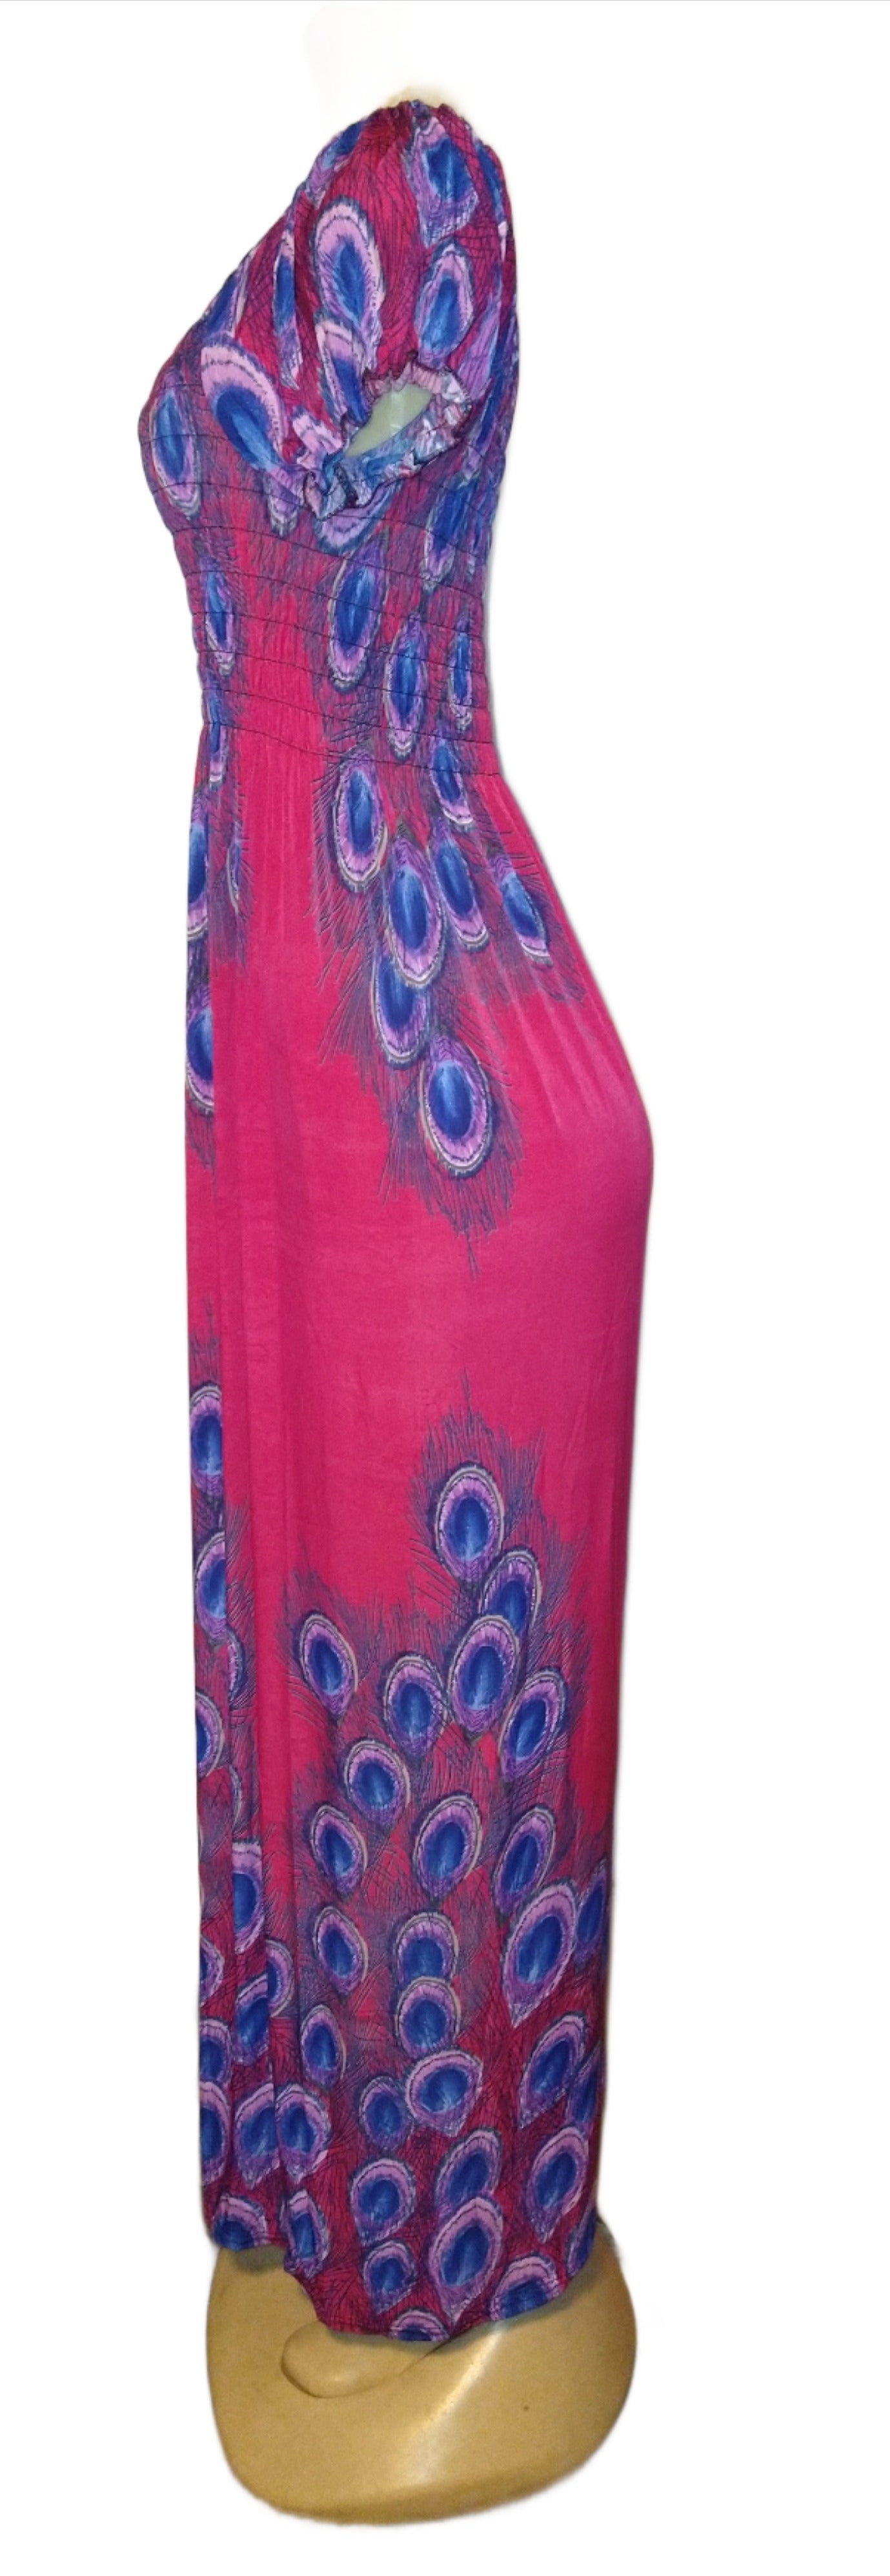 Pink Peacock Feather Dress - The Fix Clothing